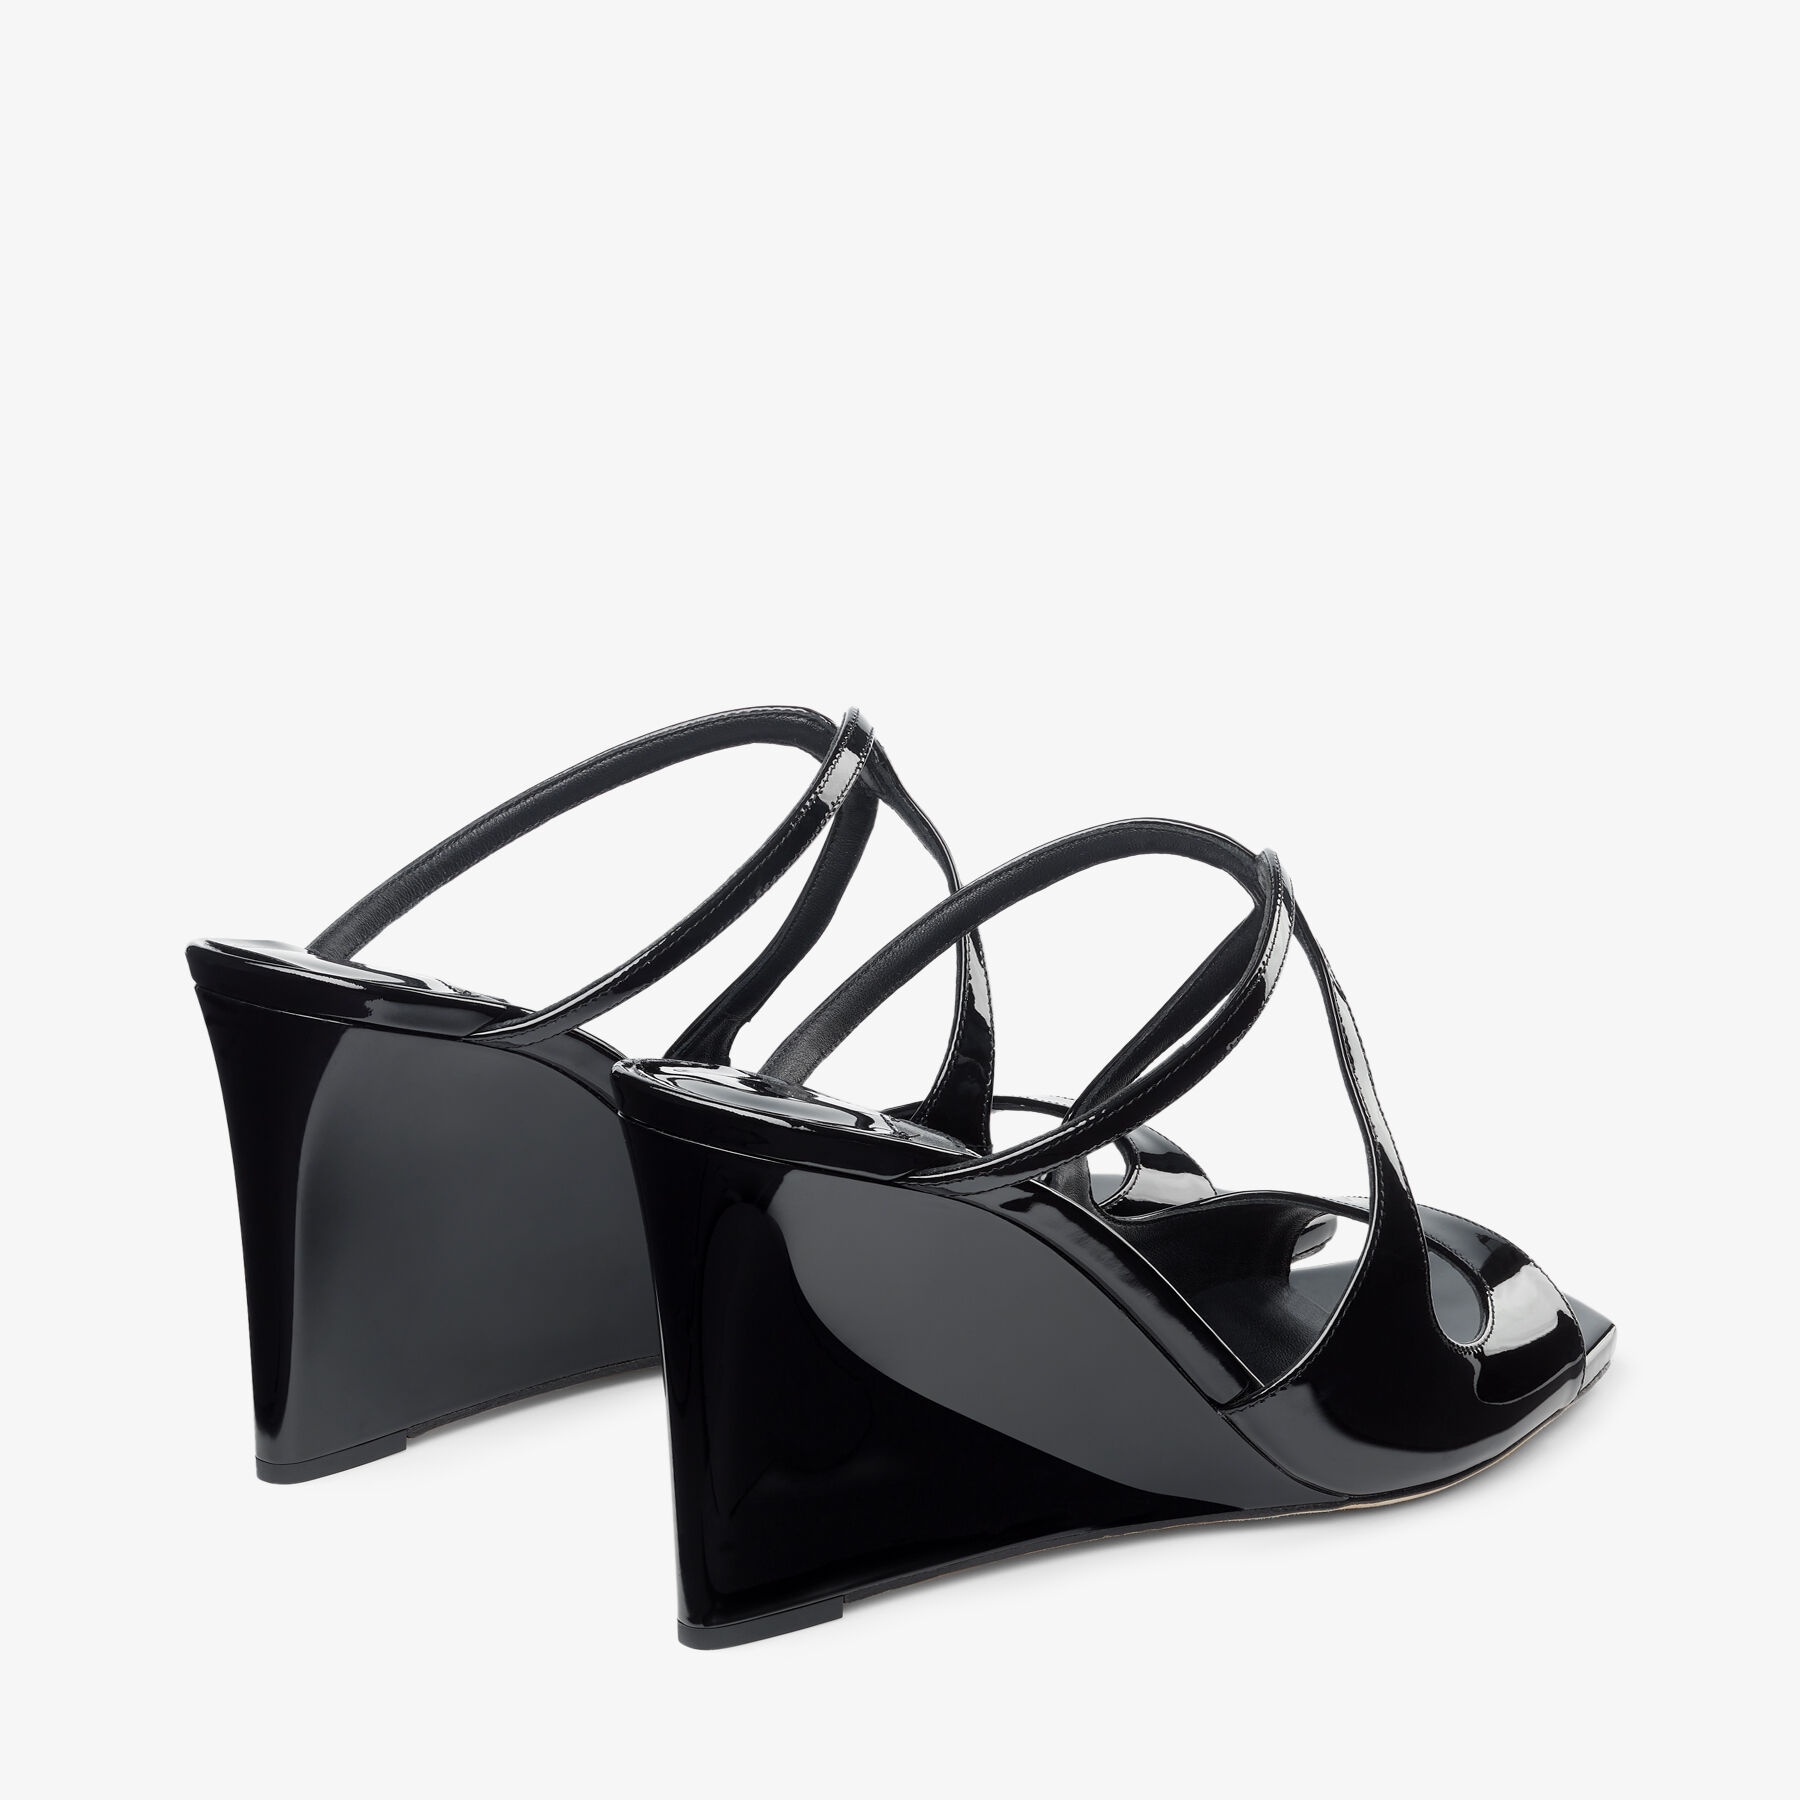 Anise Wedge 85
Black Patent Leather Wedge Mules - 5